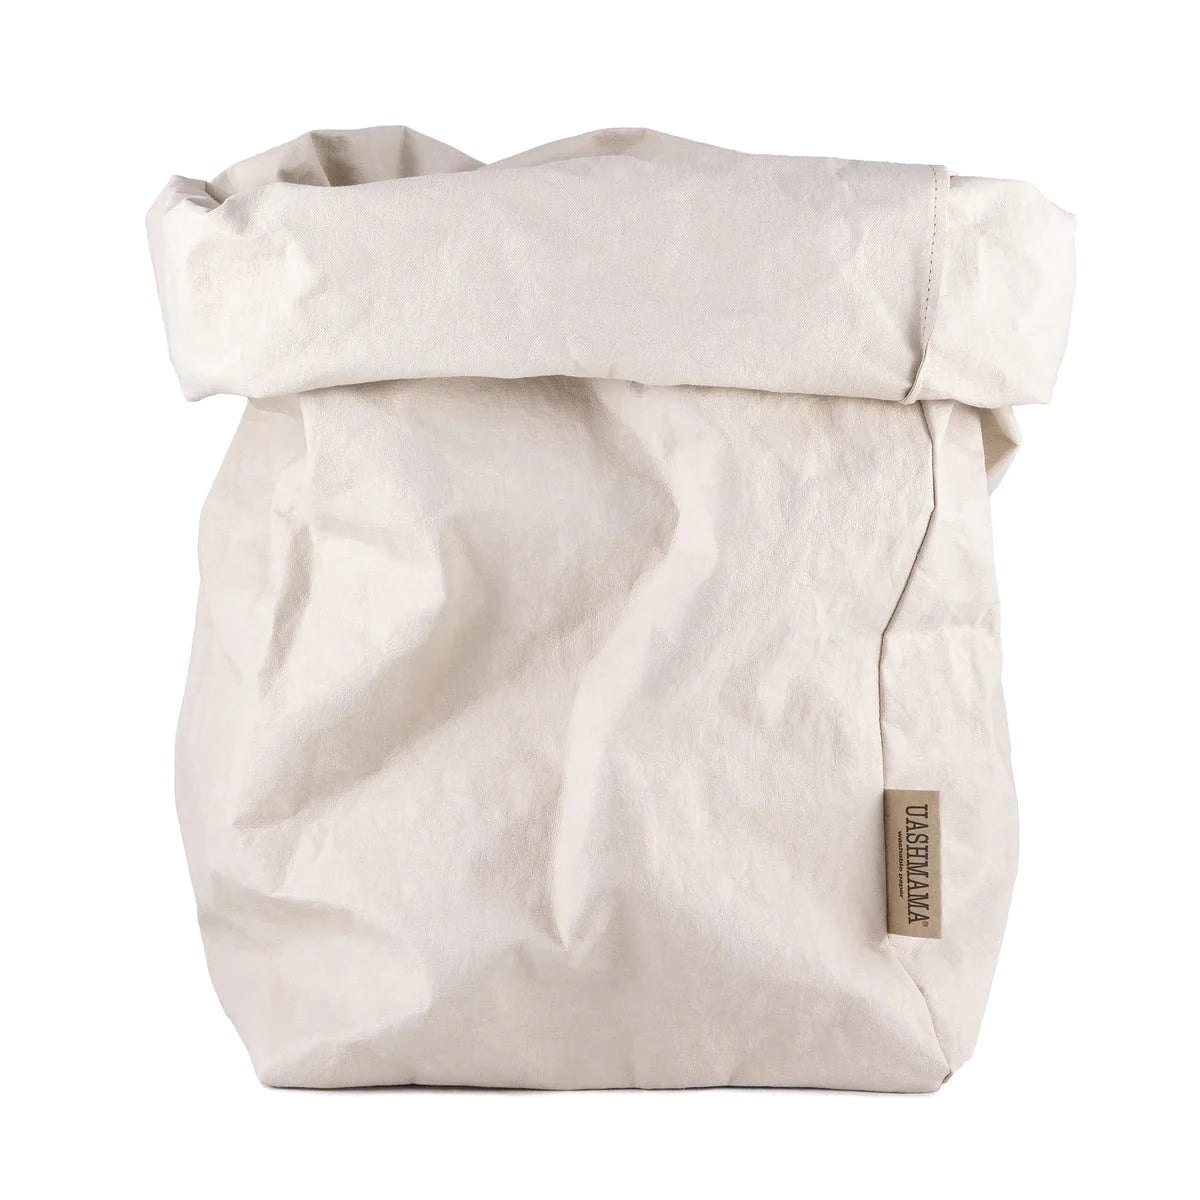 A washable paper bag is shown. The bag is rolled down at the top and features a UASHMAMA logo label on the bottom left corner. The bag pictured is the extra extra large size in a pale cream colour.